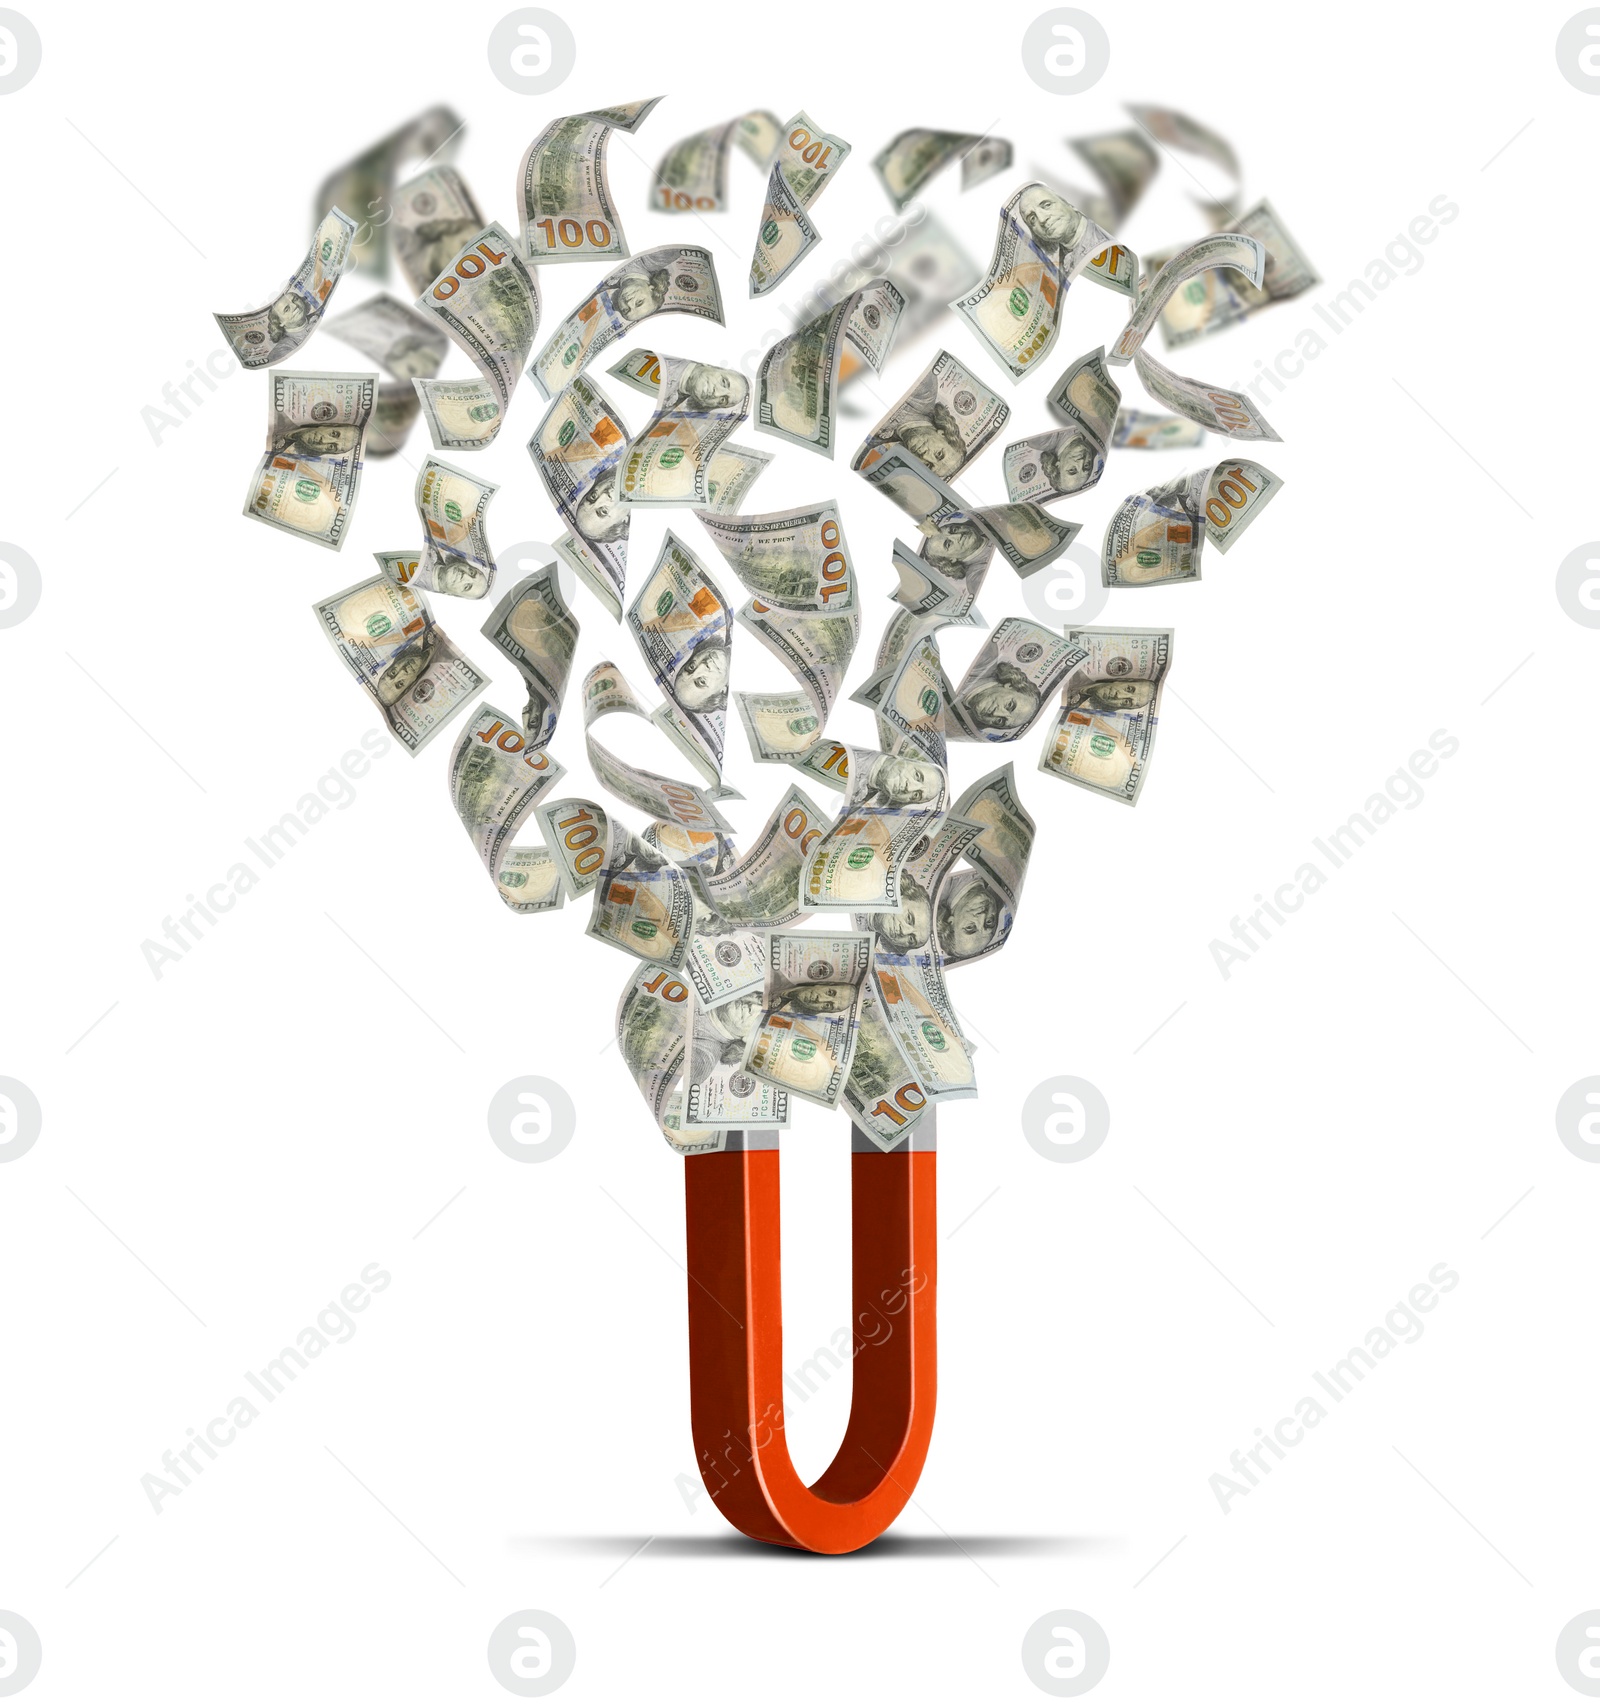 Image of Red horseshoe magnet attracting money on white background